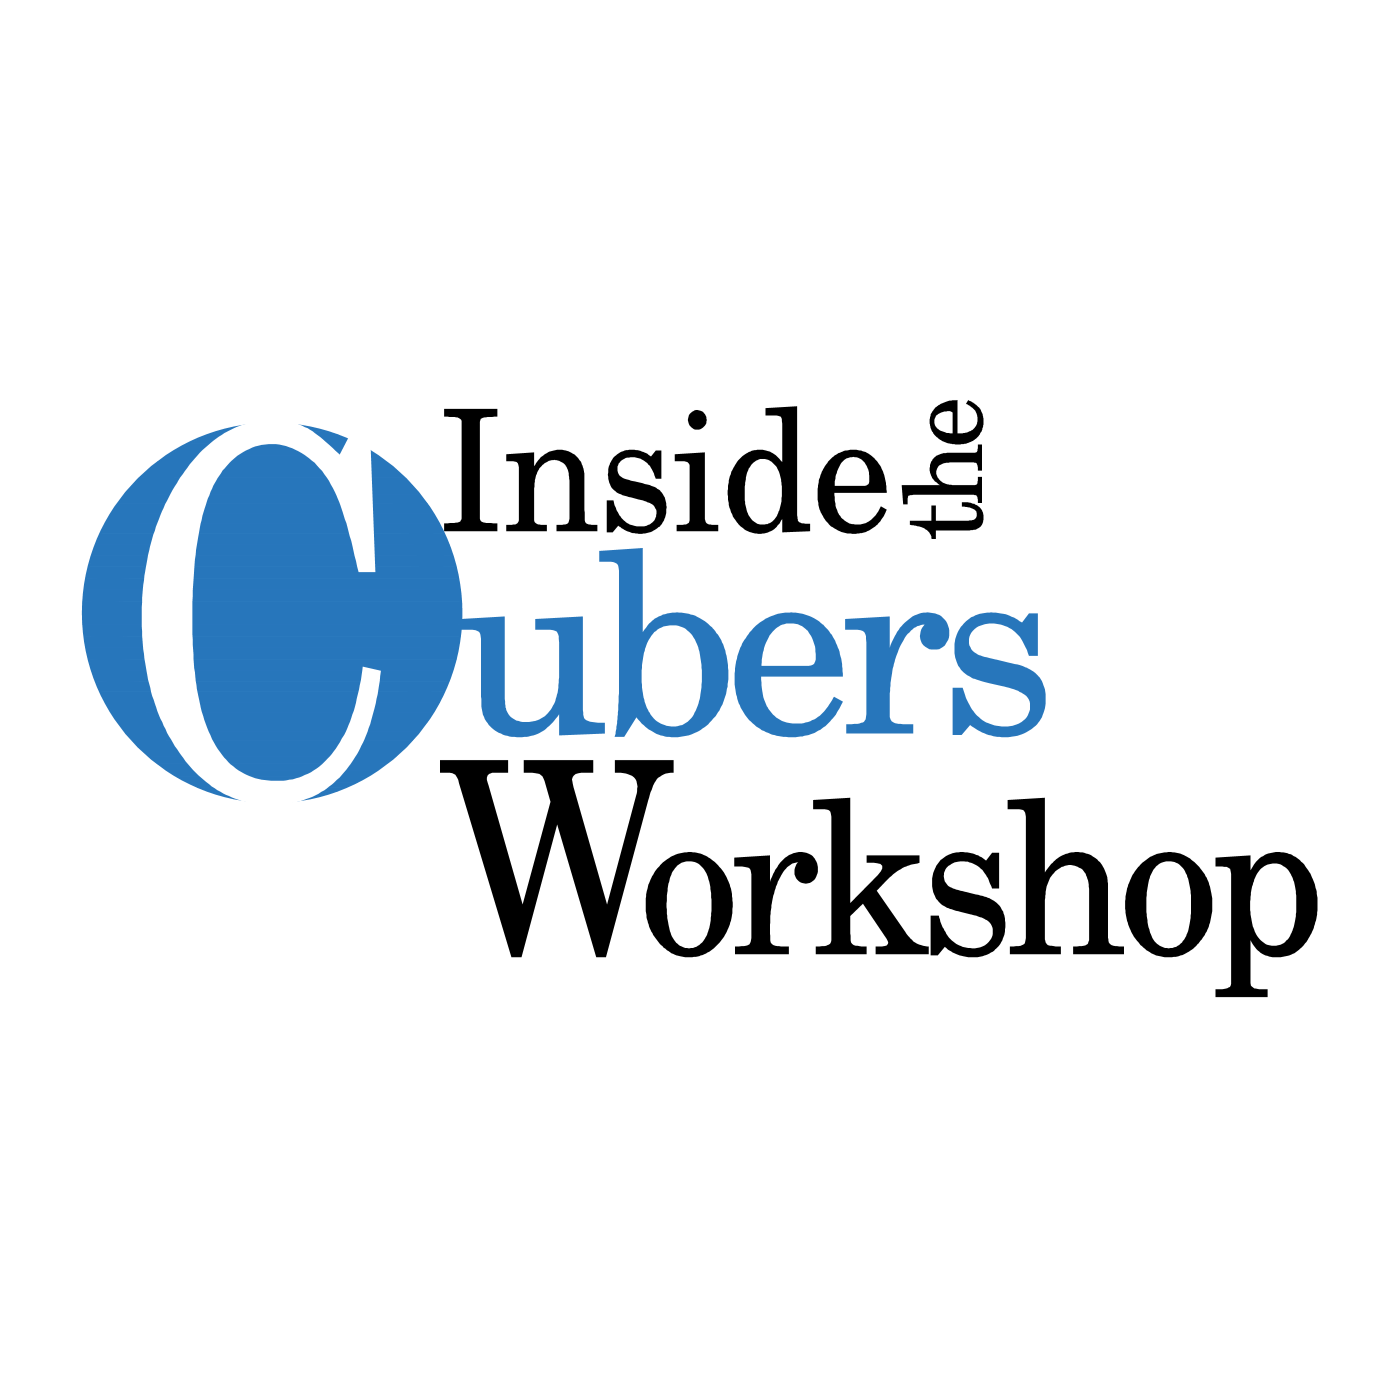 Inside the Cubers Workshop